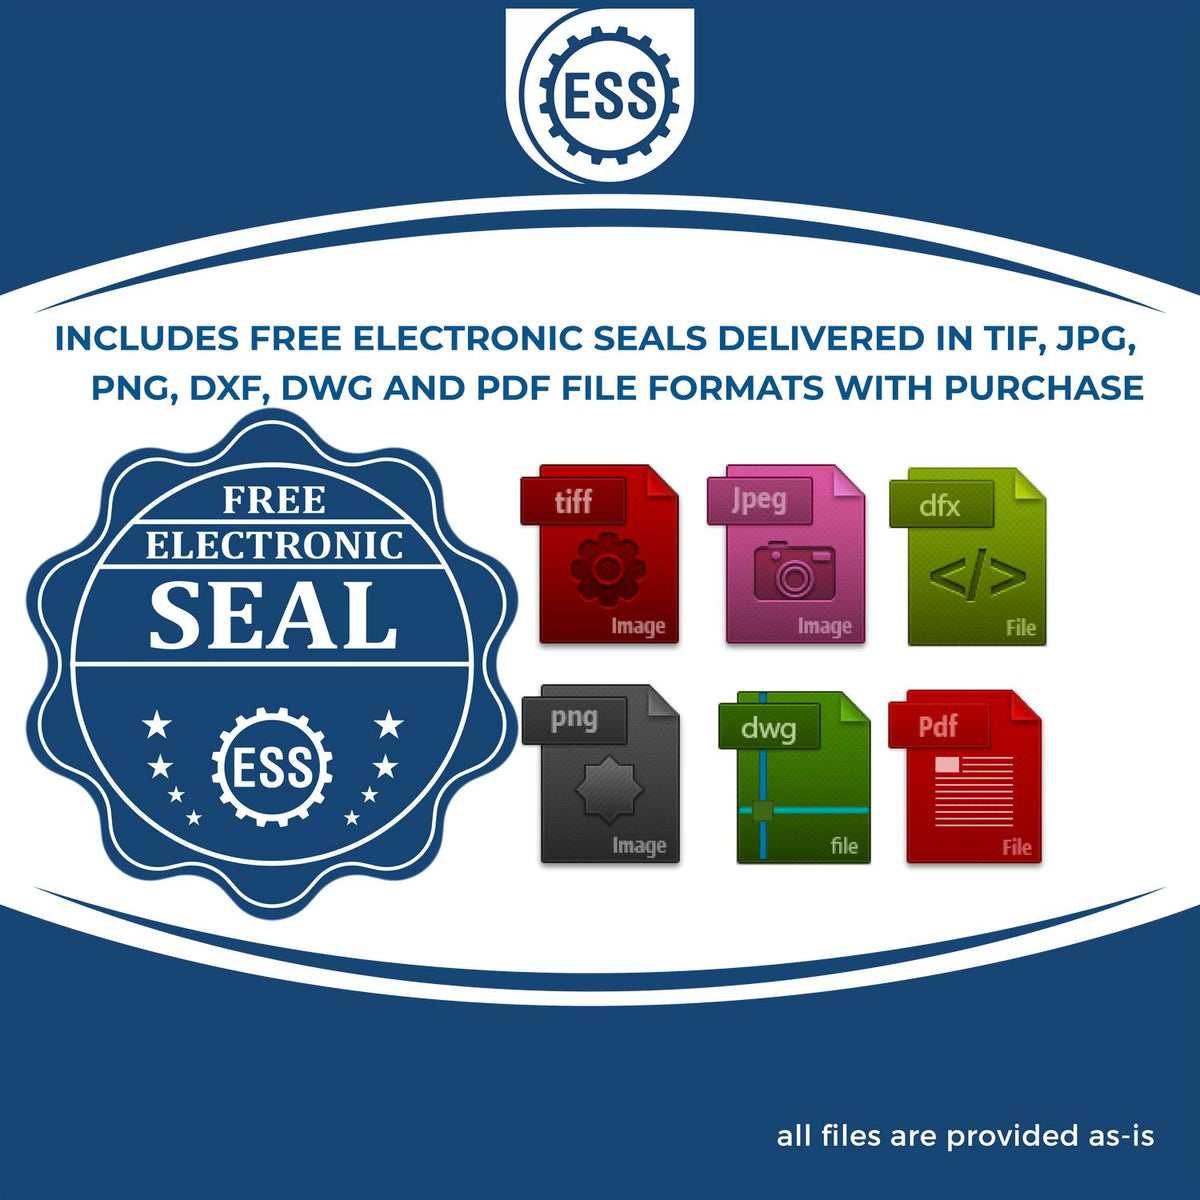 An infographic for the free electronic seal for the South Carolina Engineer Desk Seal illustrating the different file type icons such as DXF, DWG, TIF, JPG and PNG.